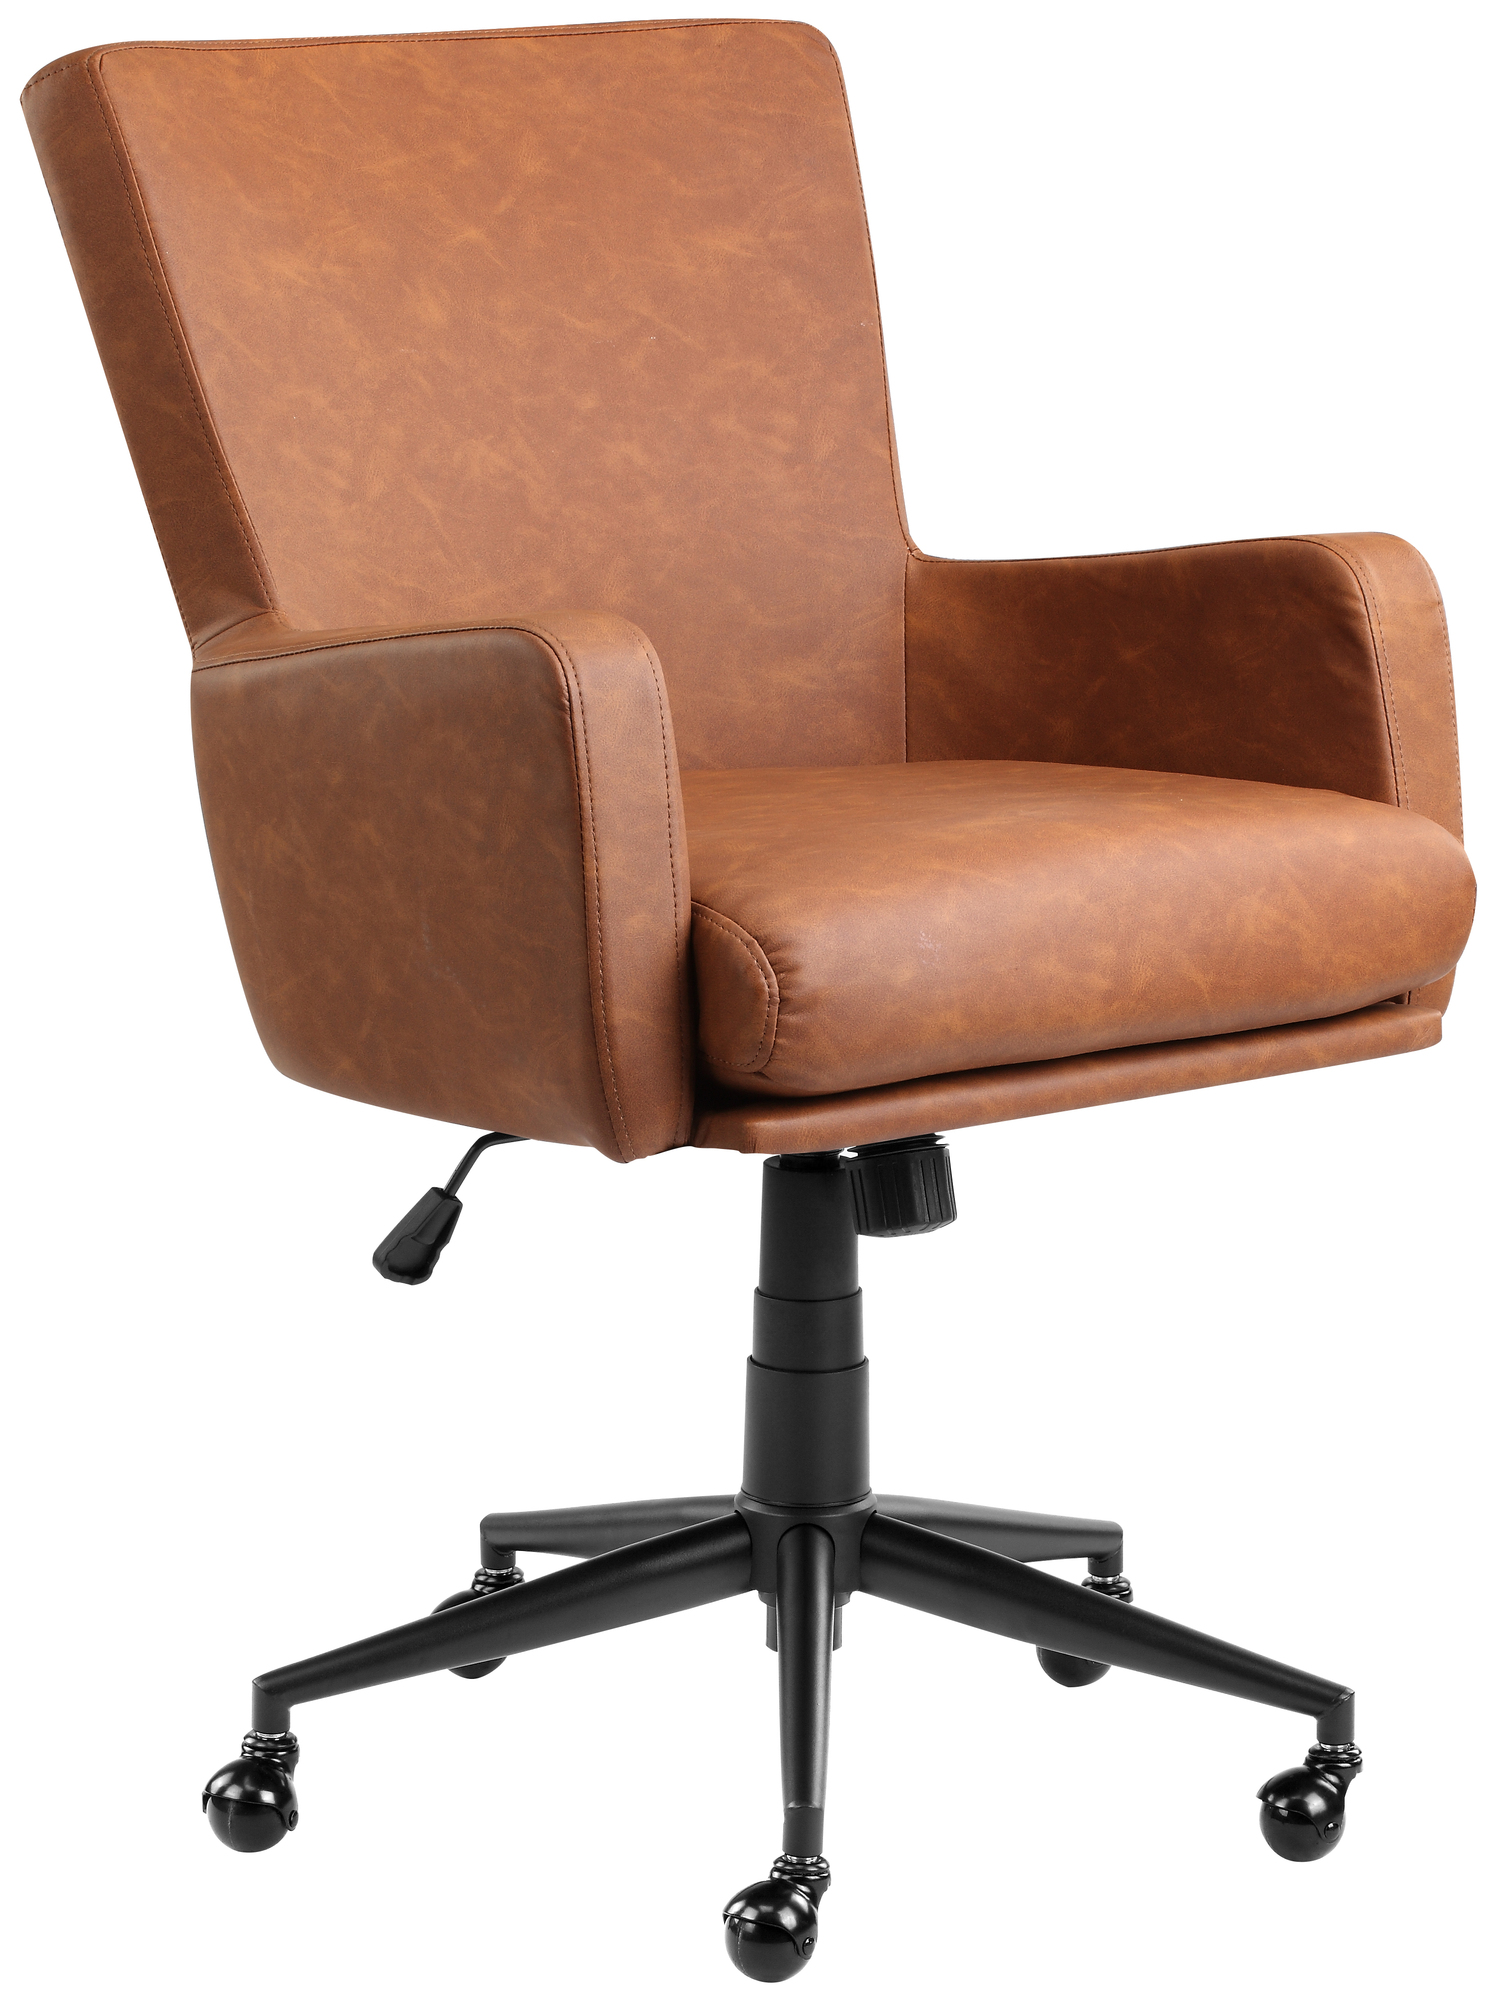 Temple & Webster Tan Creed Faux Leather Office Chair